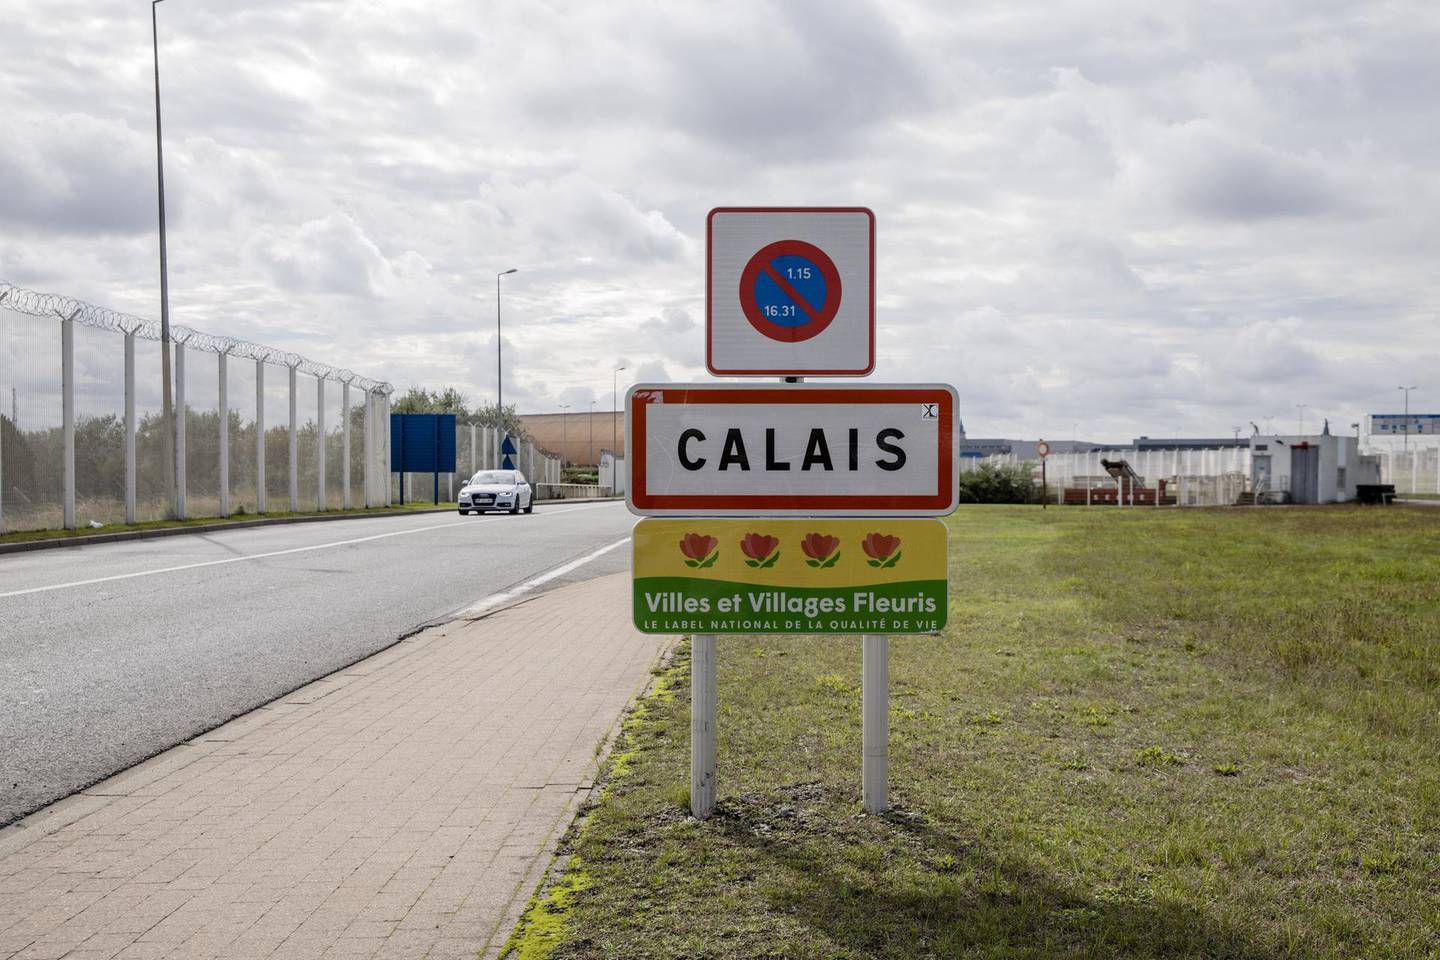 A sign for the city of Calais stands near a barbwire security fence on a road leading to the Port of Calais cross channel ferry terminal in Calais, France, on Monday, Oct. 7, 2019. The port of Calais on France’s northern coast has spent 6 million euros ($6.6 million) on facilities for customs officers, updated signage around freshly painted roads and huge extra parking lots for trucks. Photographer: Marlene Awaad/Bloomberg